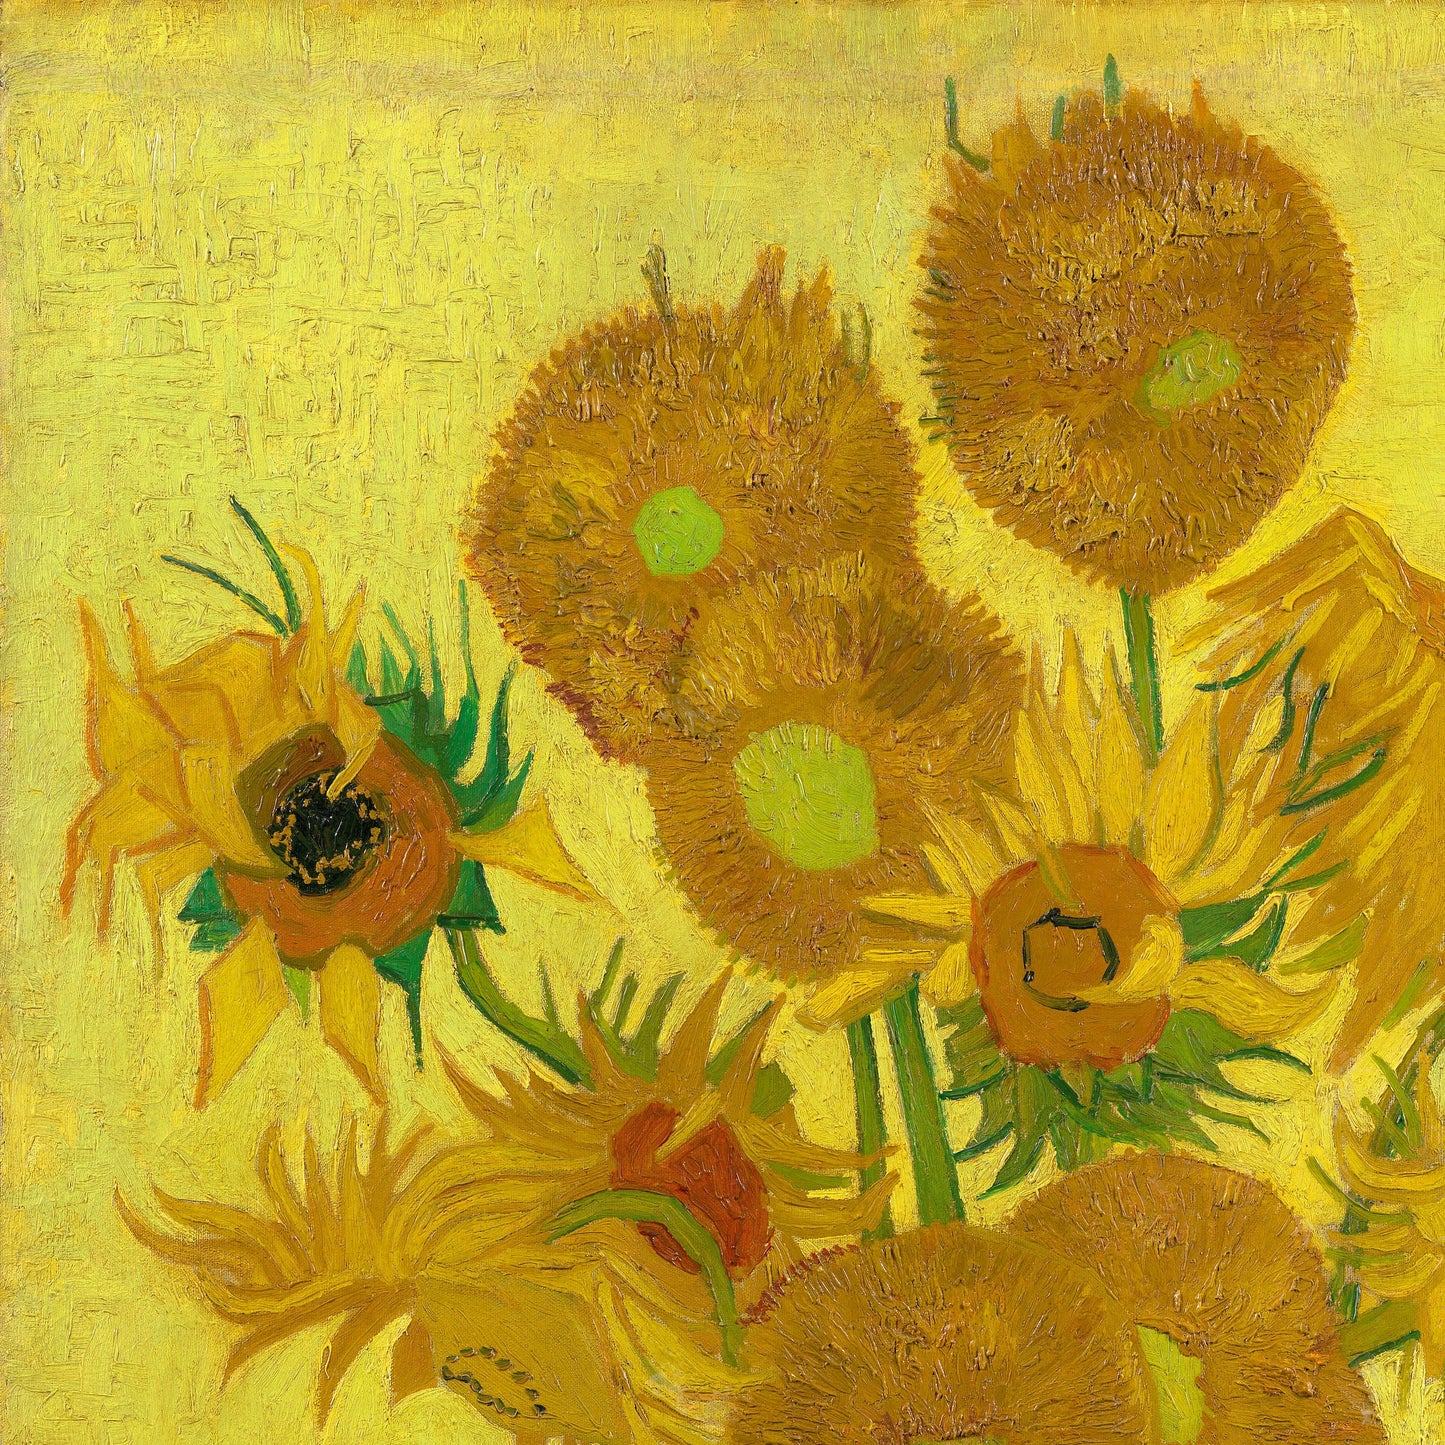 Sunflowers by Vincent Van Gogh, 3d Printed with texture and brush strokes looks like original oil-painting, code:076